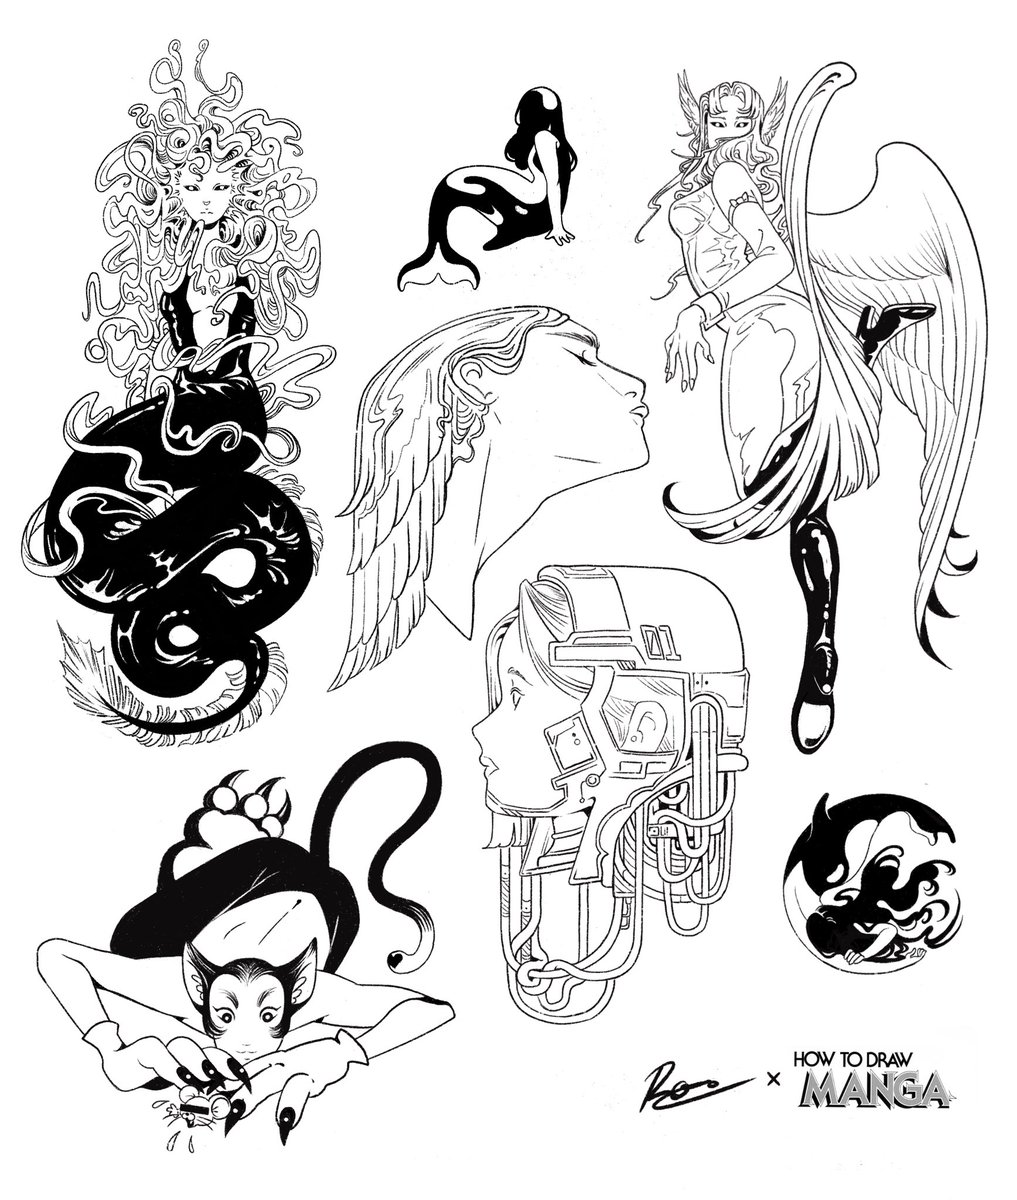 Made a tattoo flash sheet inspired by this absolutely killer page in the bible (How To Draw Manga: Bishoujo) because why the hell not, you know? 